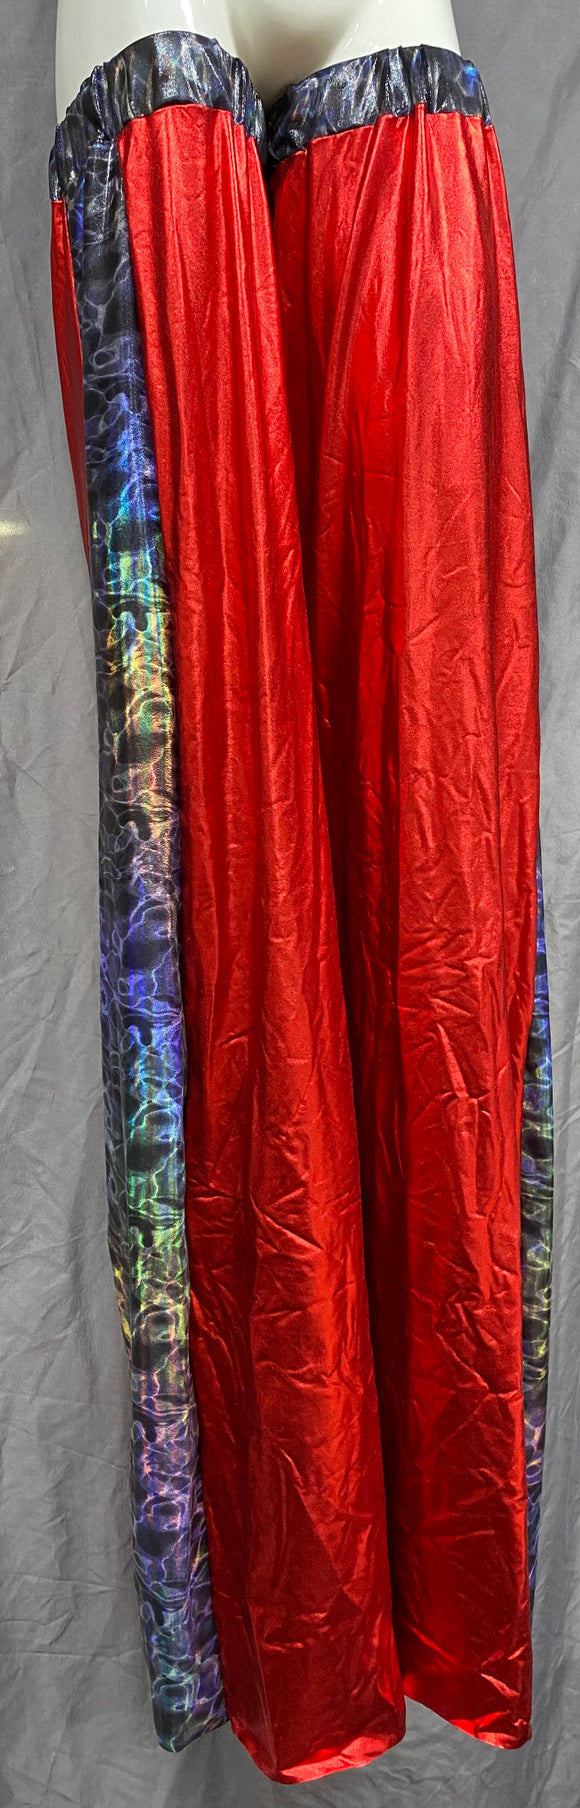 Stilt Covers - Shiny Red with Smoke 54.5